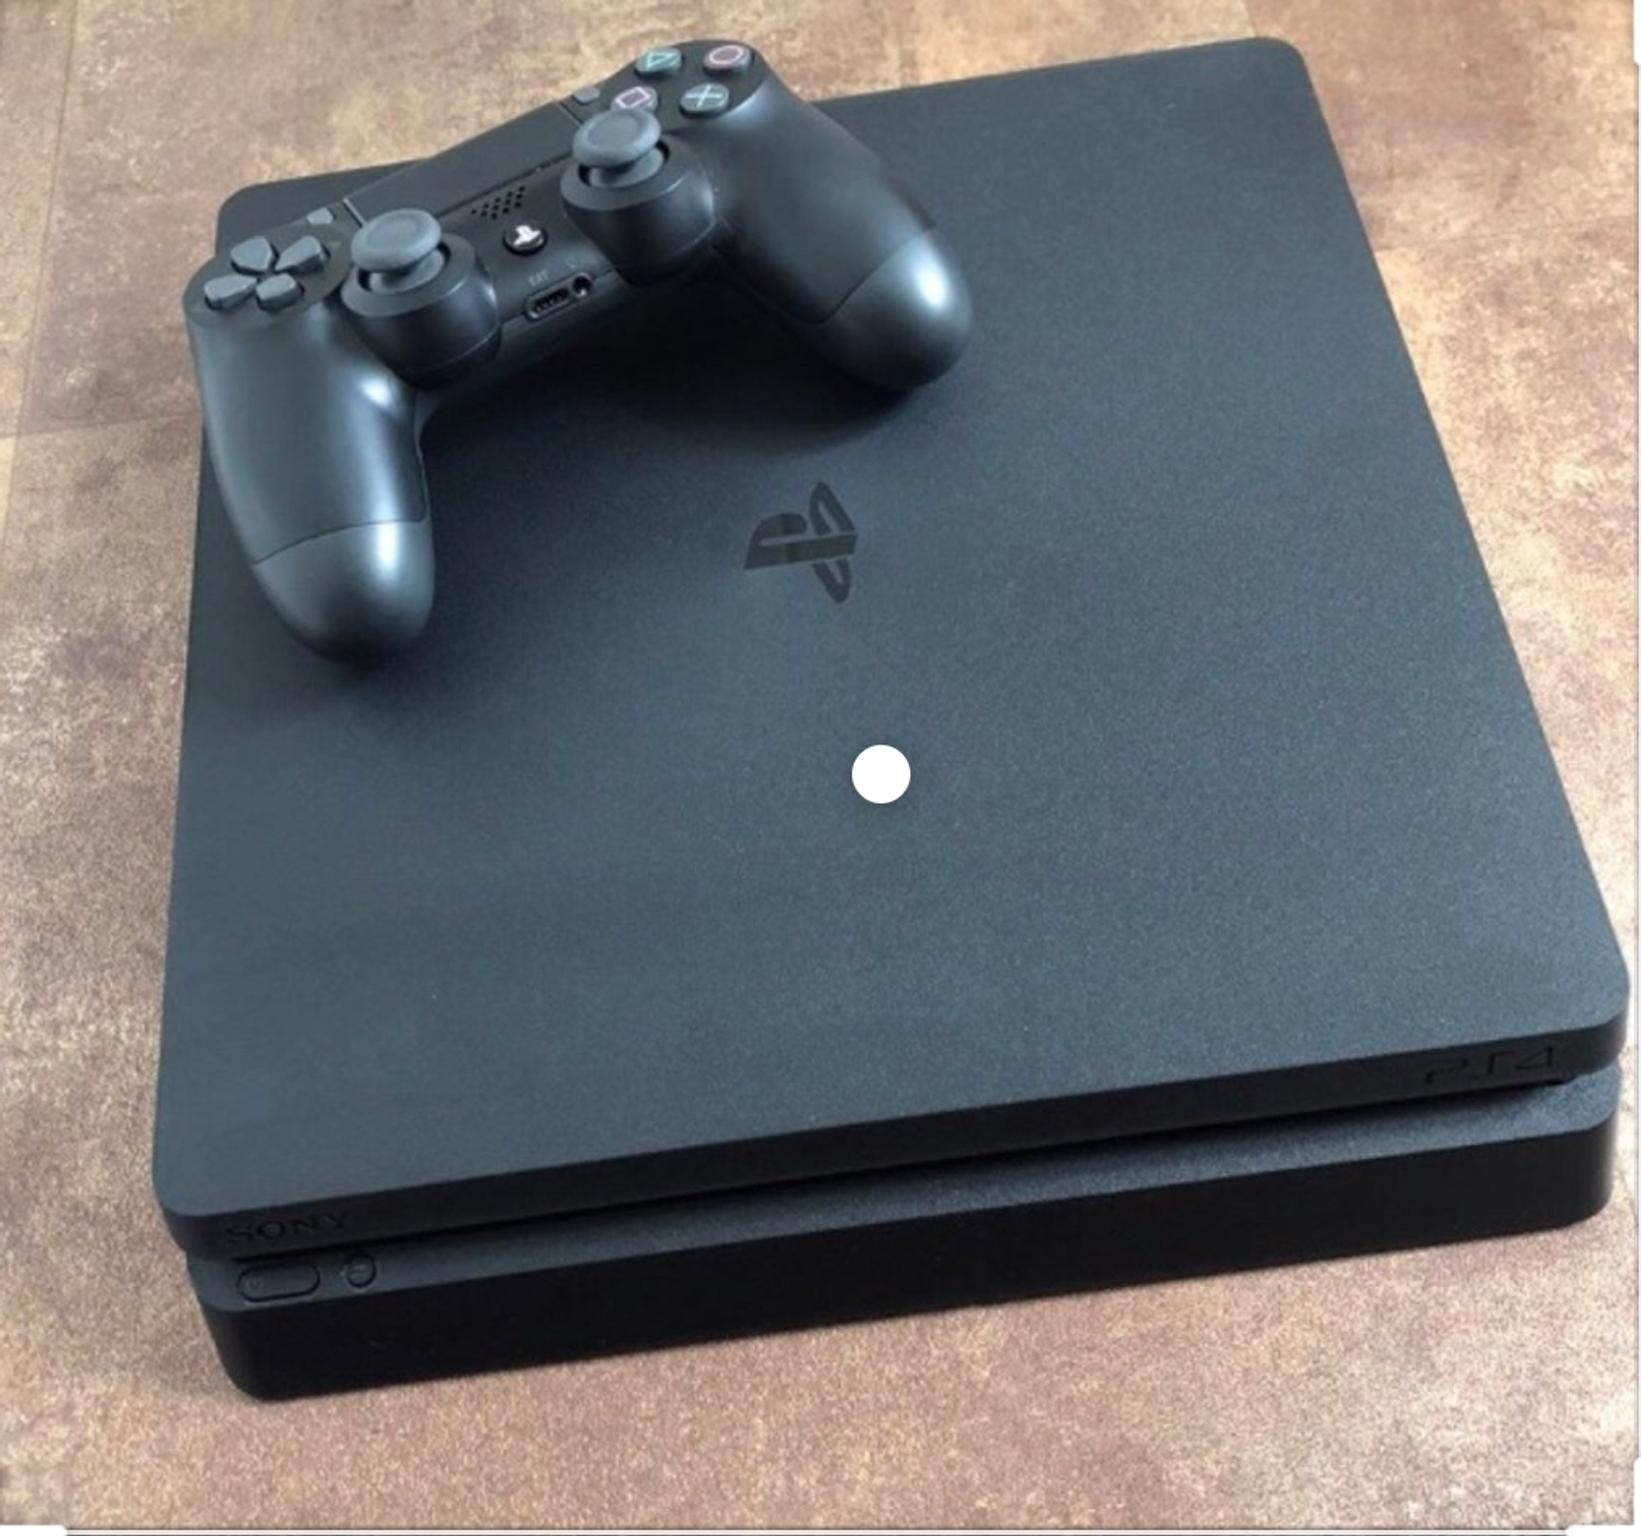 Ps4 Slim / Ps4 Pro Cleaning Service in Hyndburn for £10.00 for sale ...